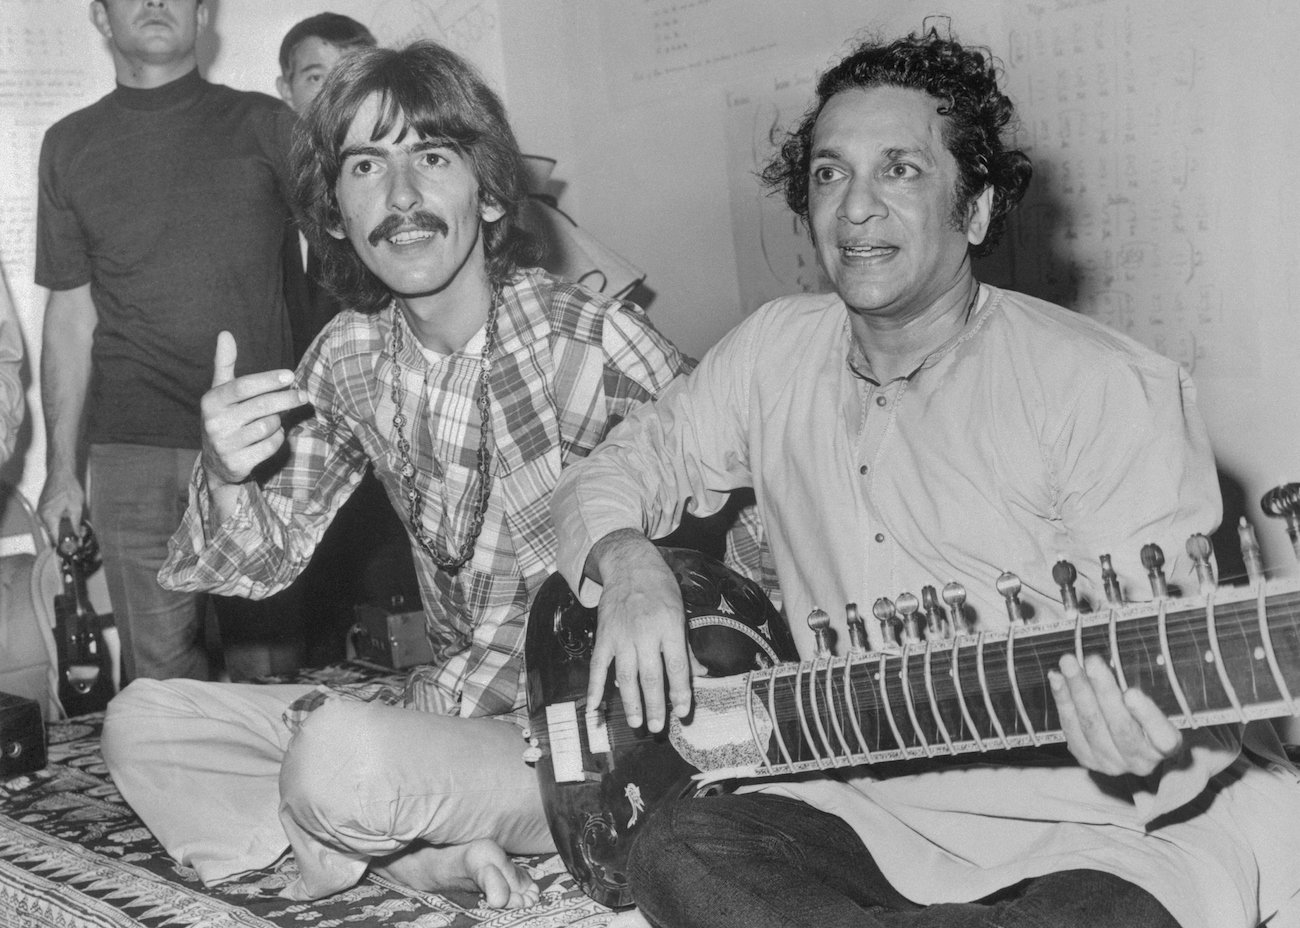 George Harrison and Ravi Shankar playing Indian music in 1967.